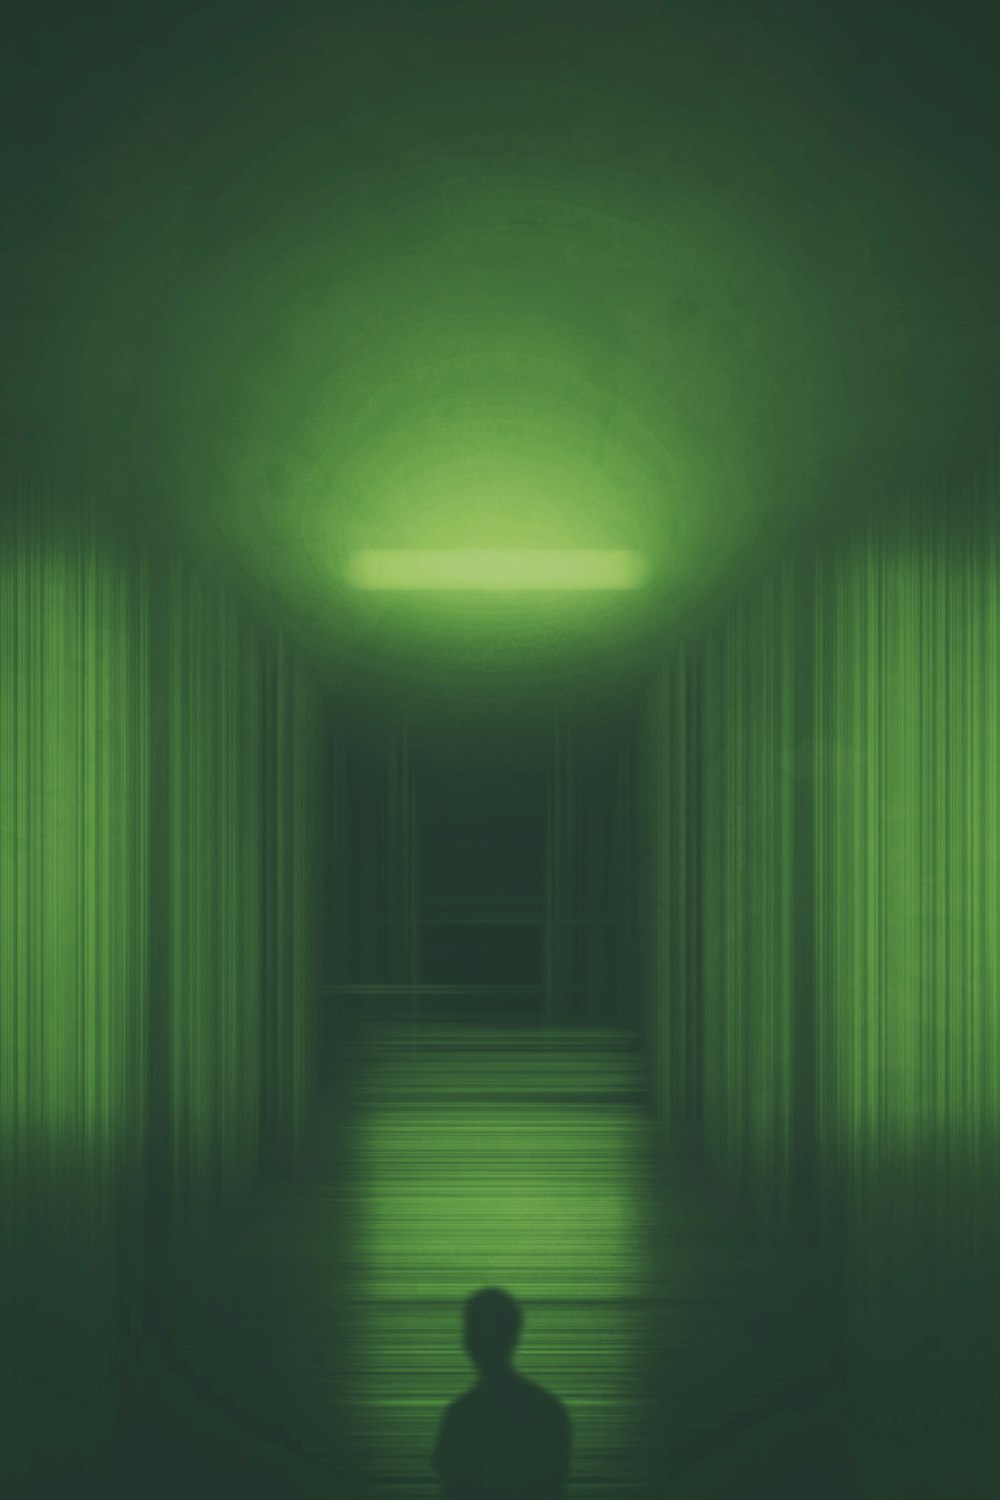 a person standing in a dark room with a green light